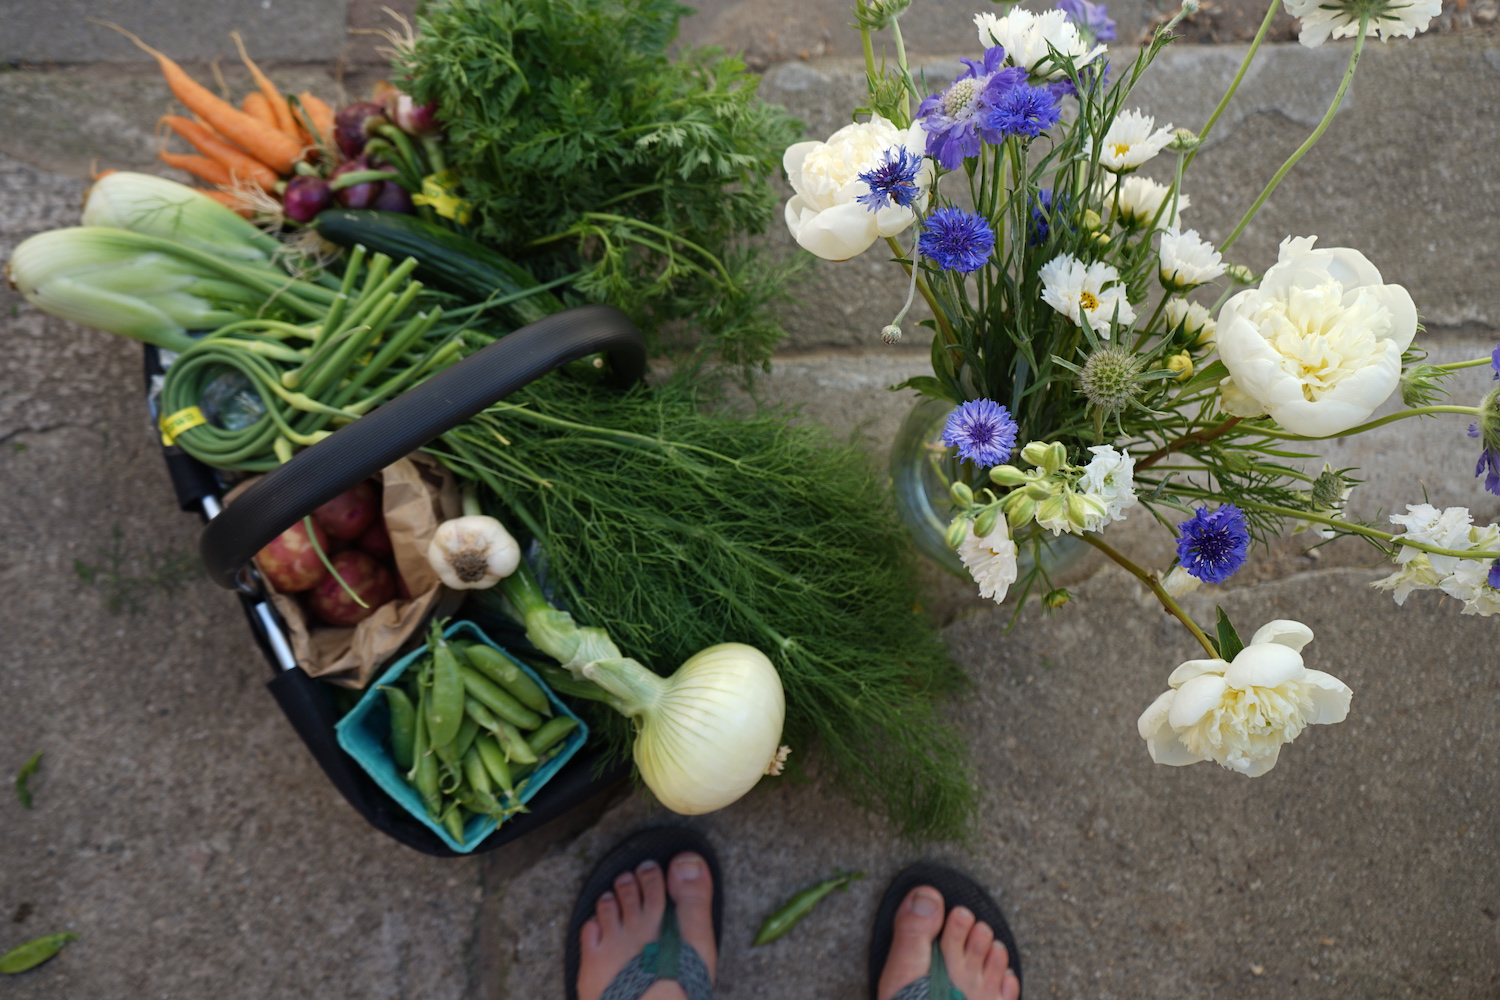 Becca Reynolds started the MyMarketBasket hashtag on Instagram for her finds at the Boise Farmers' Market.